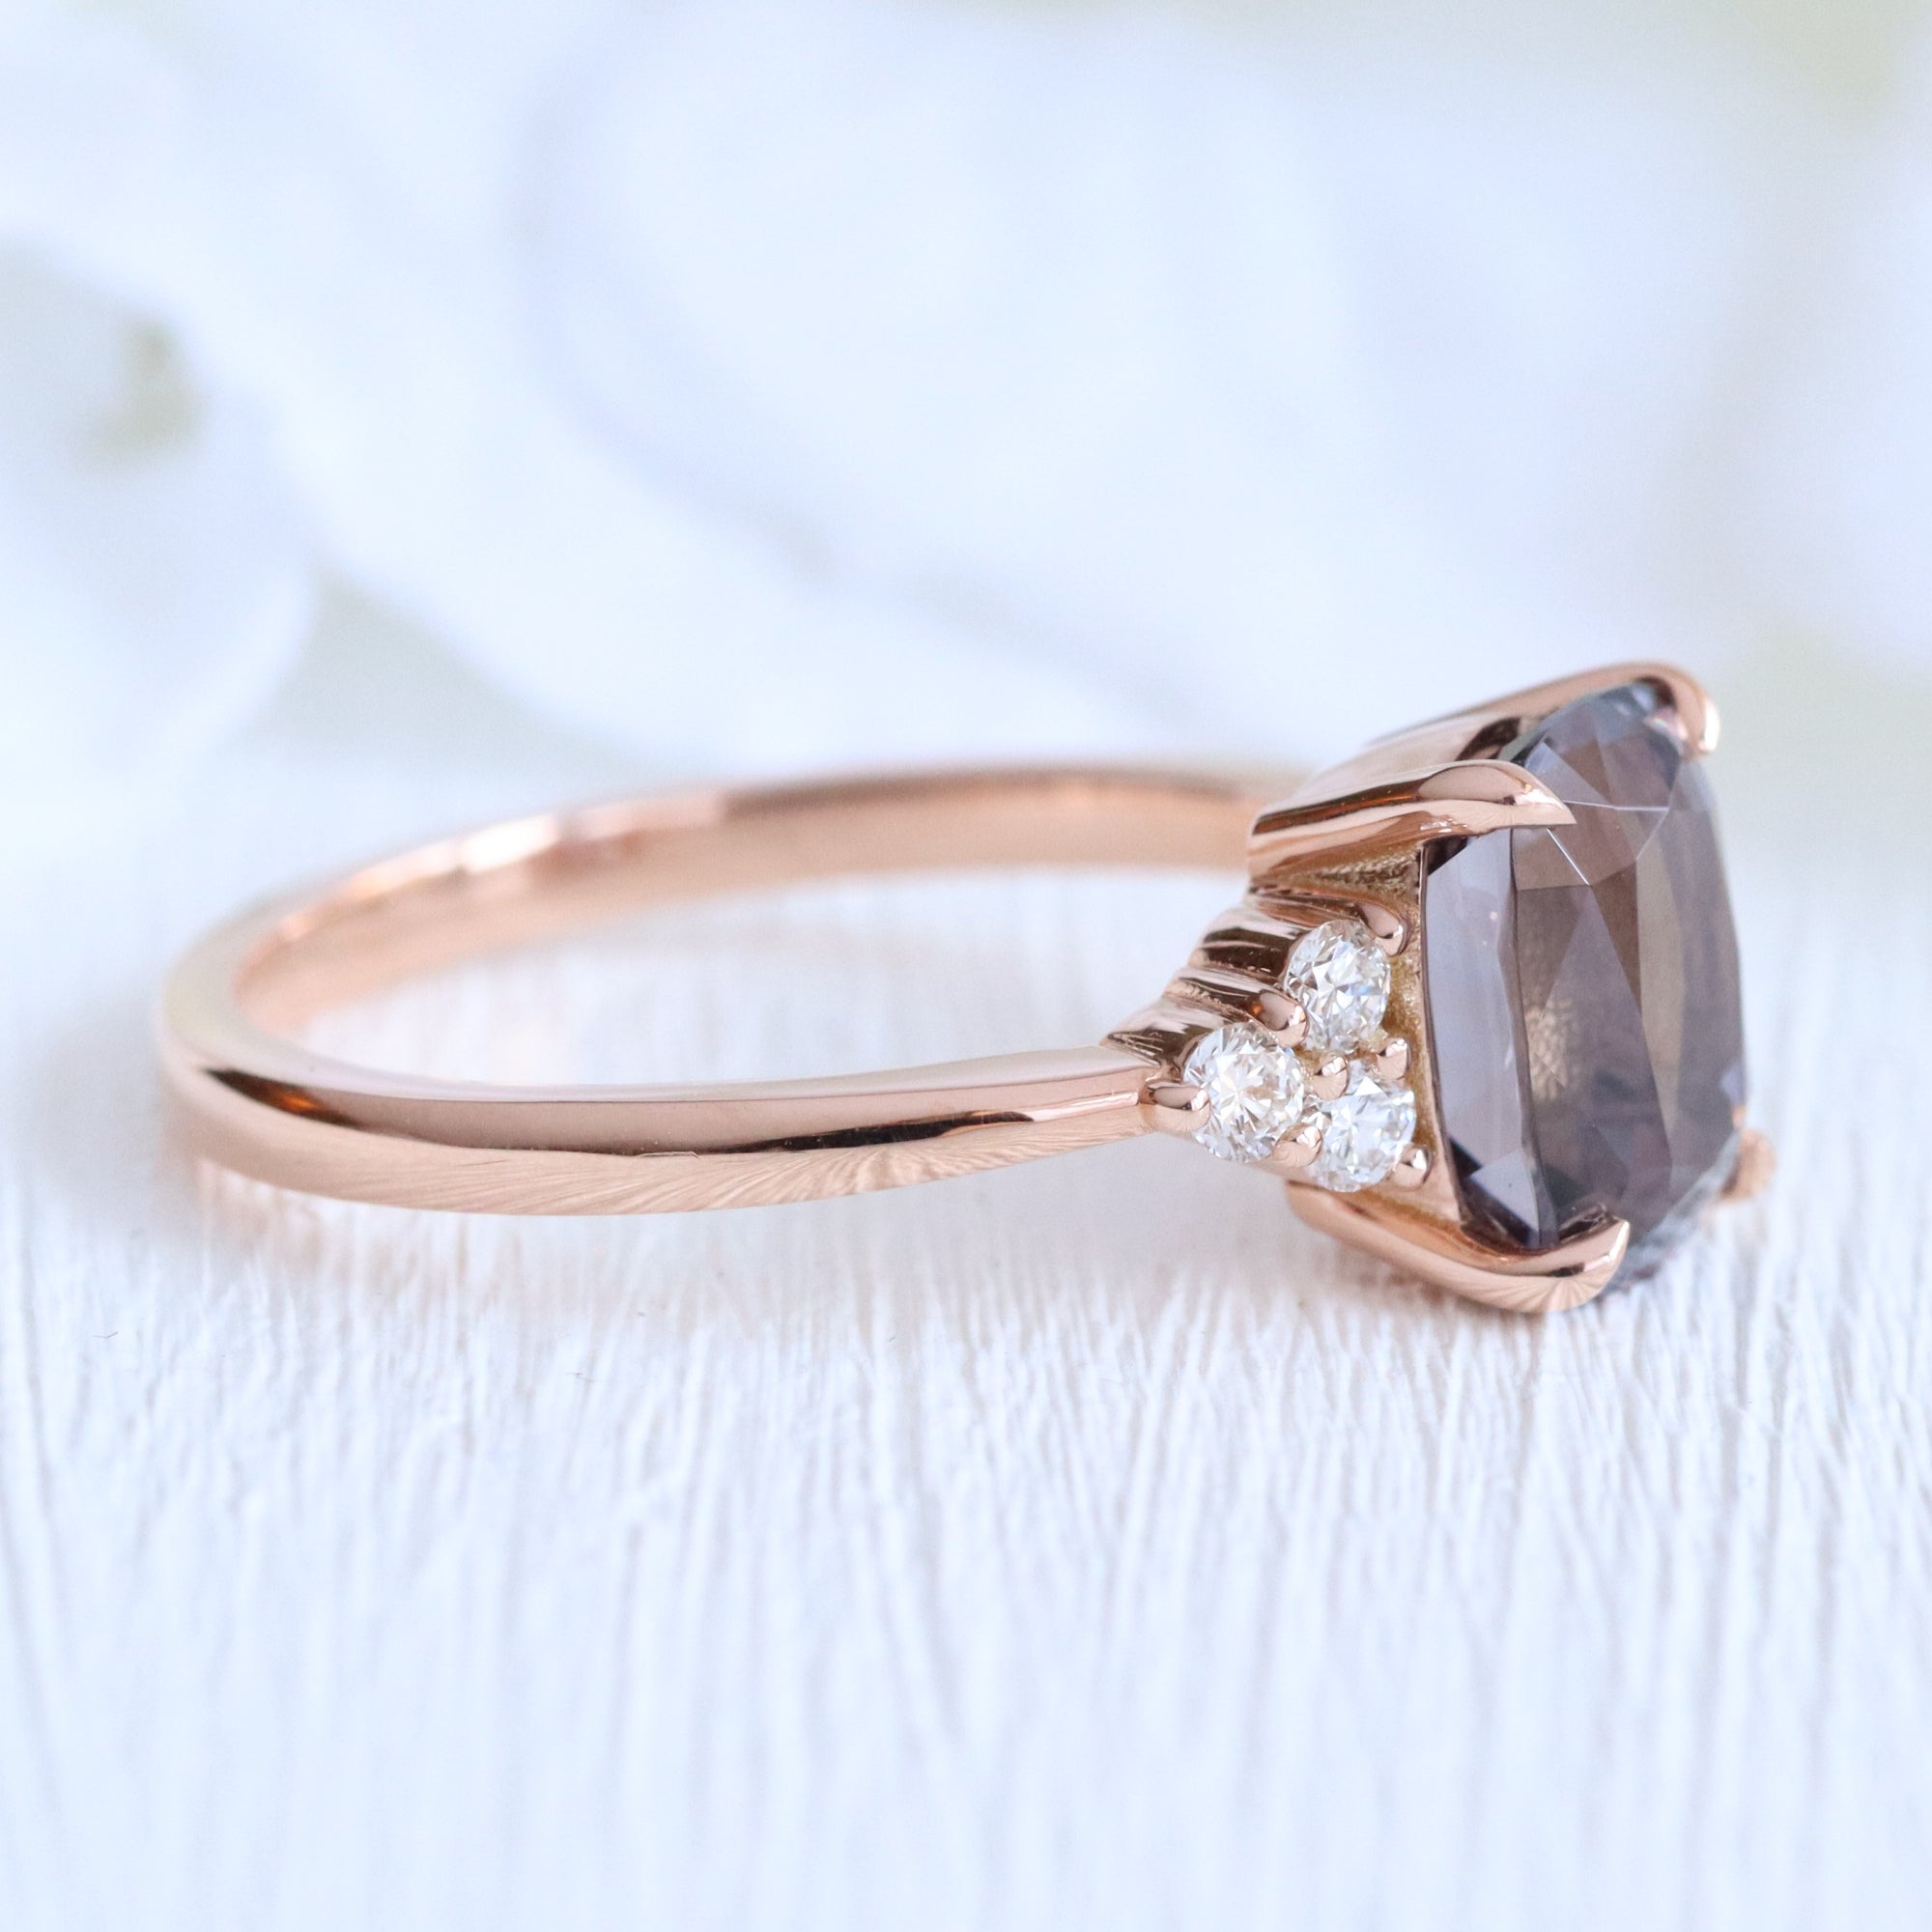 Cushion grey spinel diamond ring rose gold 3 stone engagement ring la more design jewelry